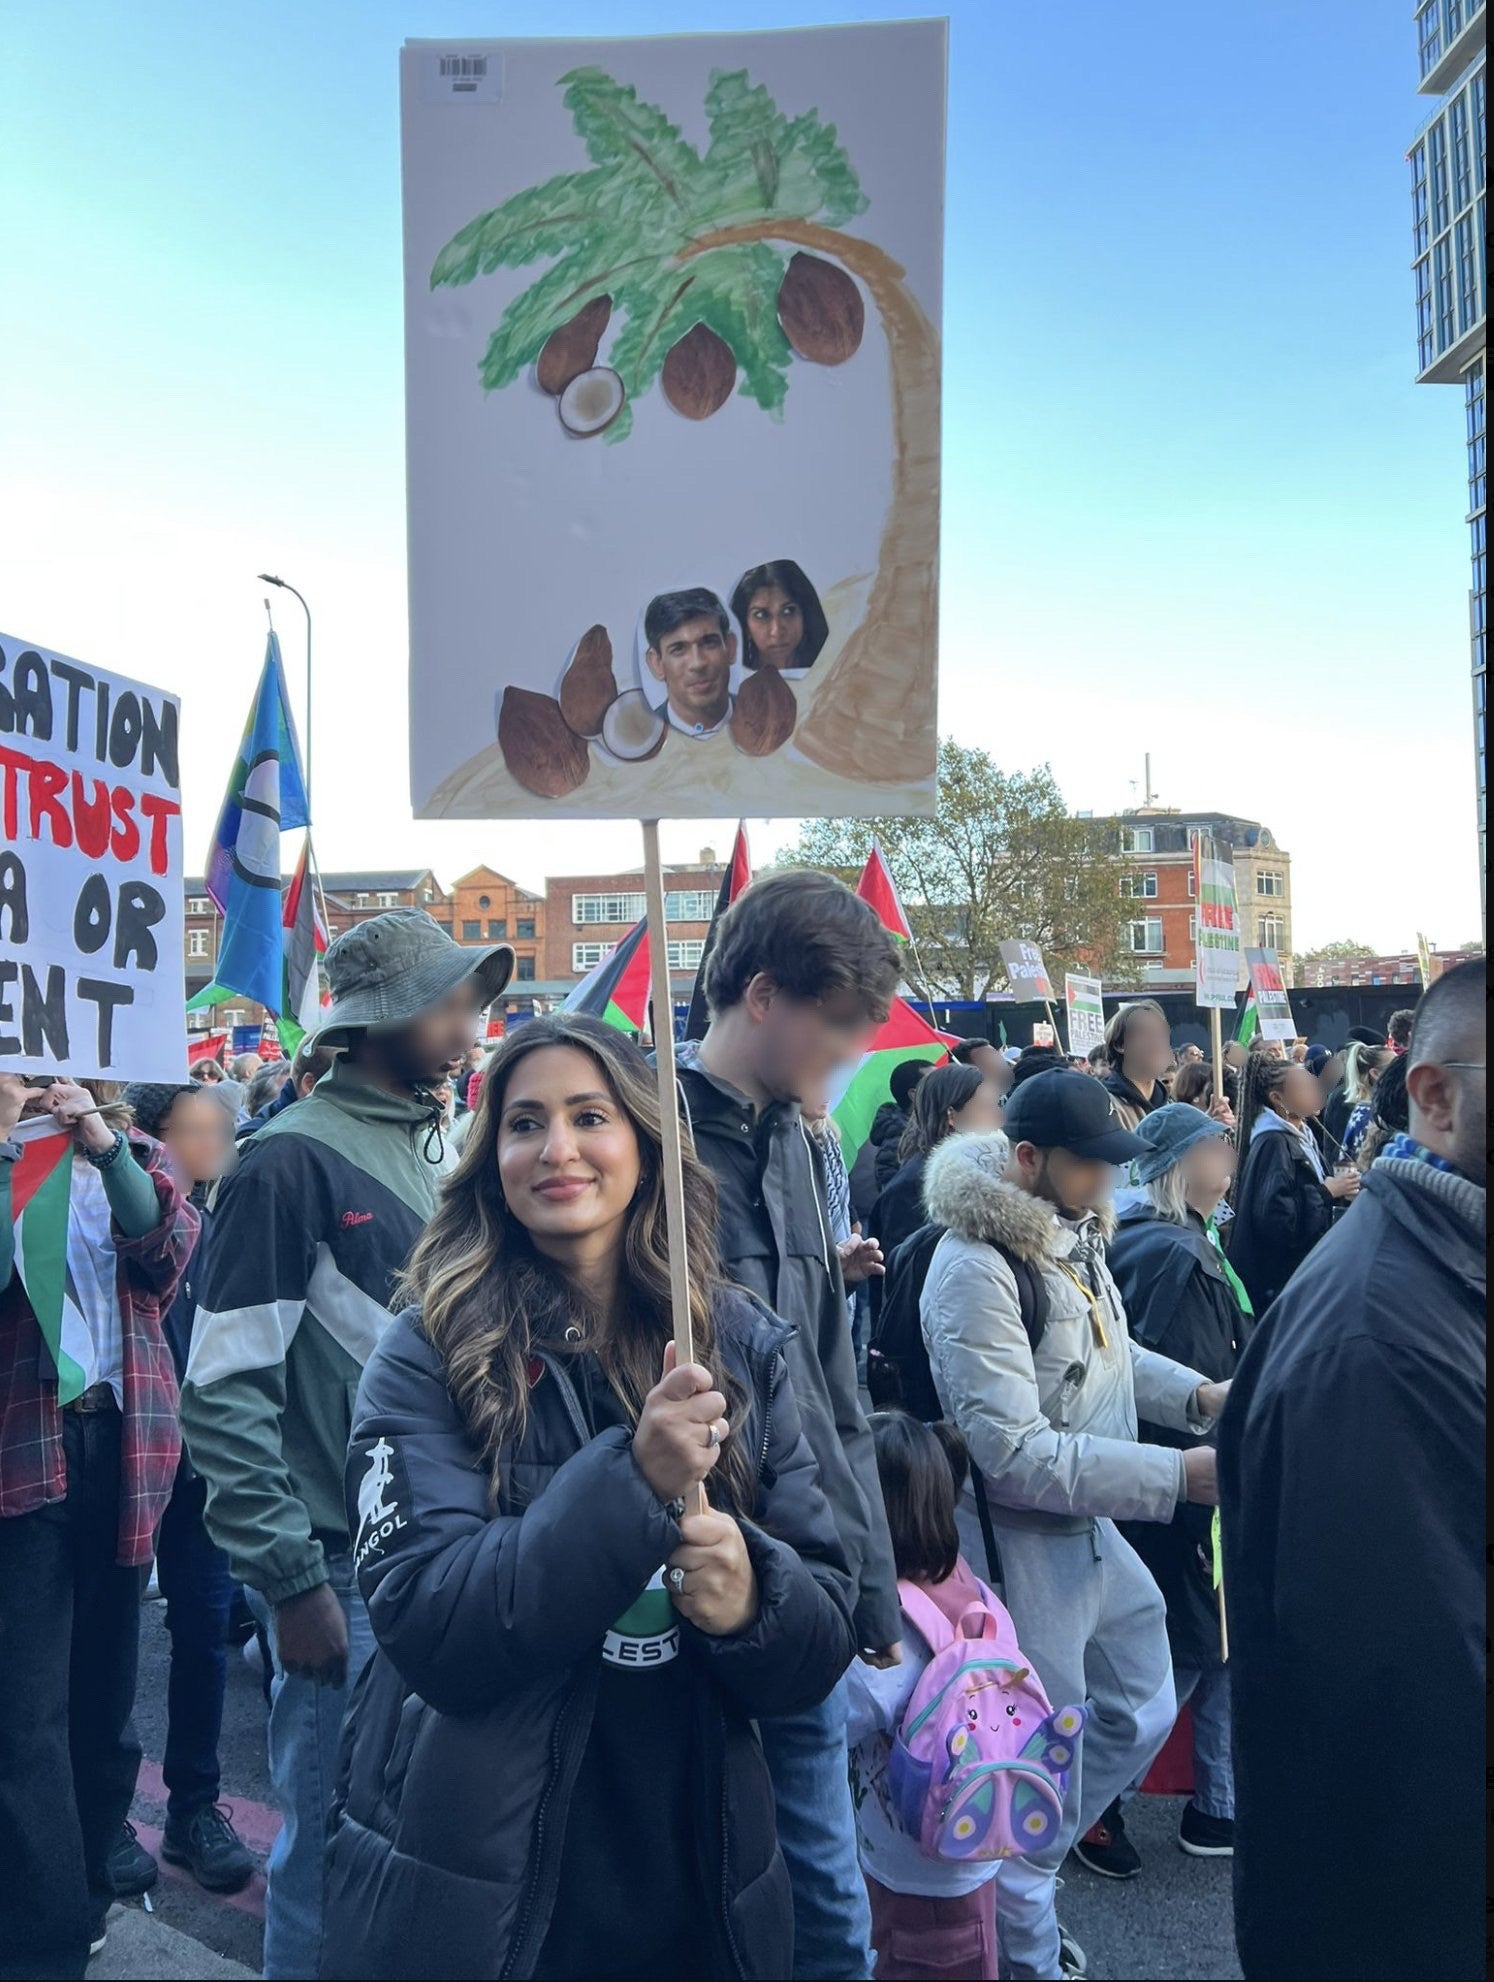 Police are also investigating the woman pictured here who held a placard depicting a palm tree with Suella Braverman and Rishi Sunak below as fallen coconuts